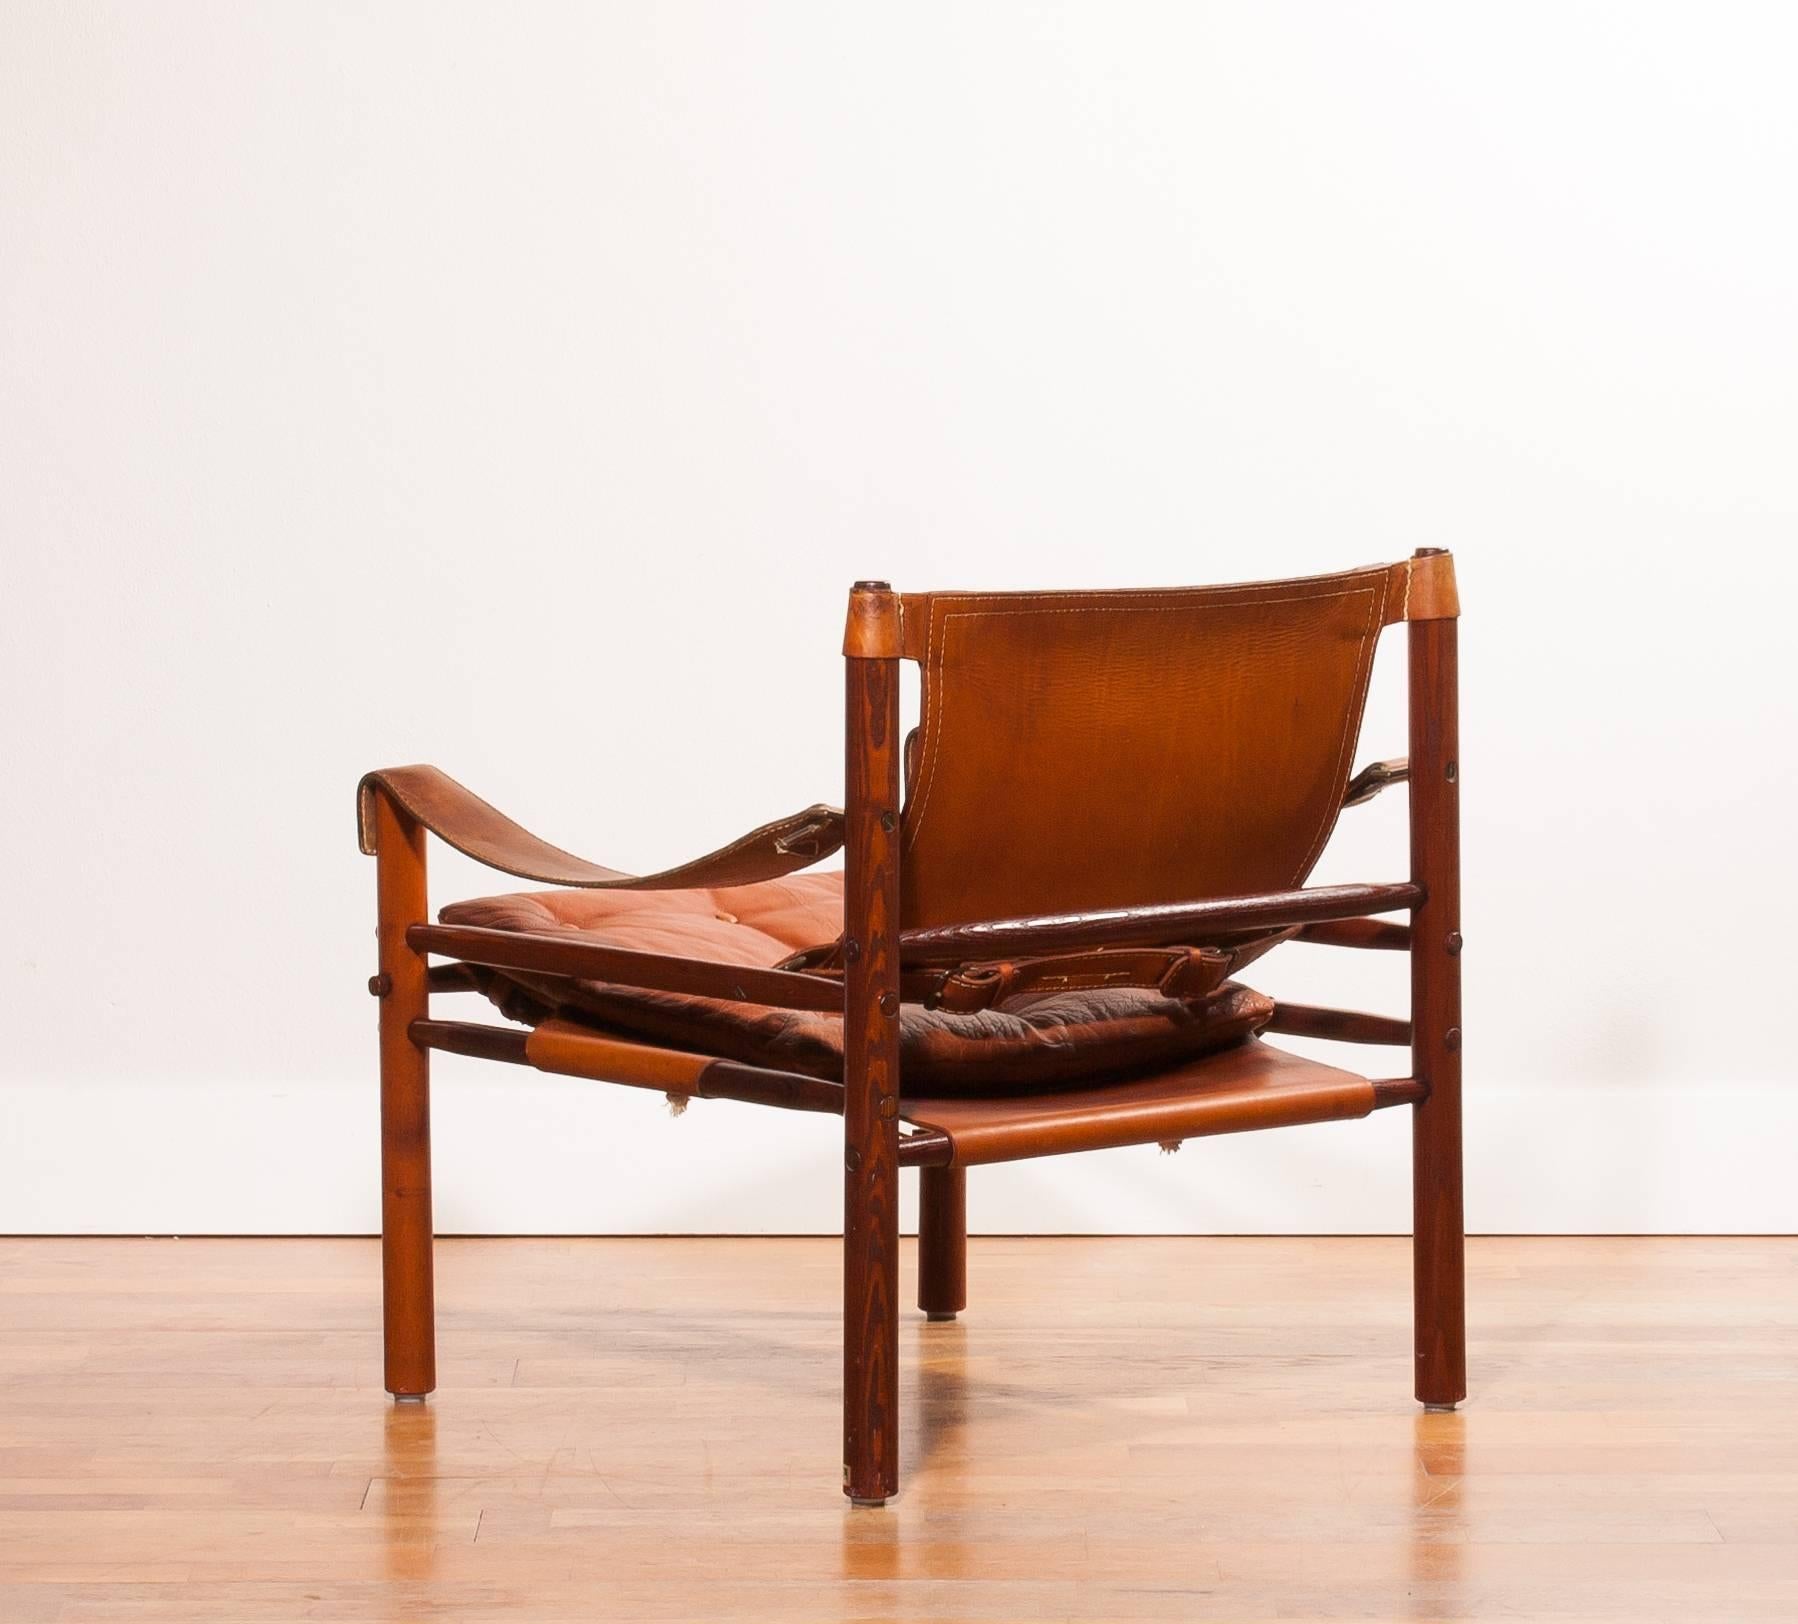 A beautiful 'Sirocco' safari chair designed by Arne Norell and produced by Arne Norell AB in Aneby Sweden.
The frame is made of oak and the seating , rug and armrest are made of very sturdy saddle leather.
There is an extra leather cushion for the